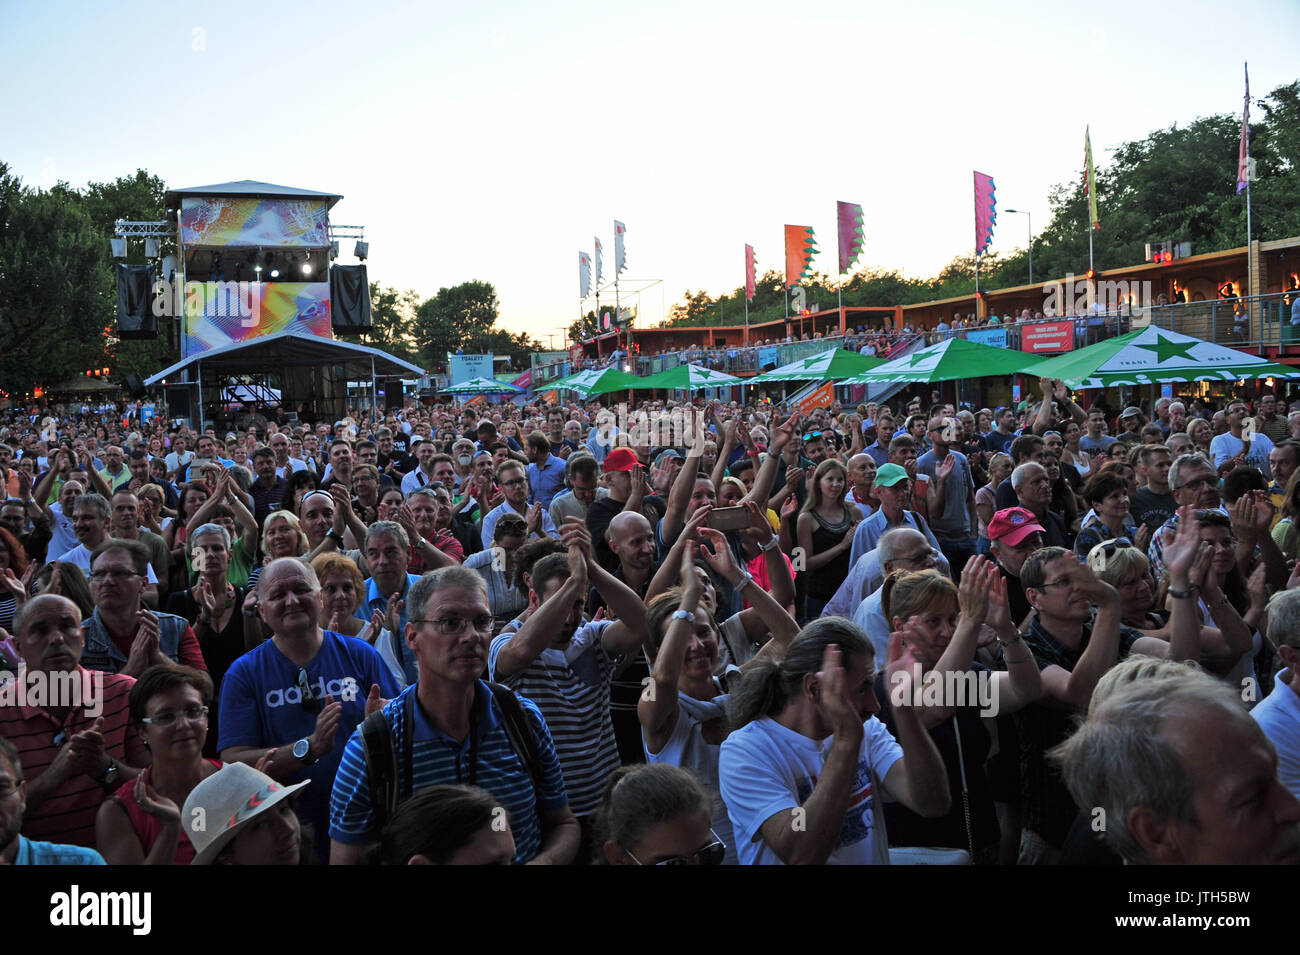 Budapest, Hungary. 8th Aug, 2017. Crowds watch musicians perform at the Wings of Freedom concert at the Sziget Festival in Budapest, Hungary, 8 August 2017. The Sziget Festival, originally known as Eurowoodstock, was held for the first time 25 years ago. Photo: Ursula Düren/dpa/Alamy Live News Stock Photo